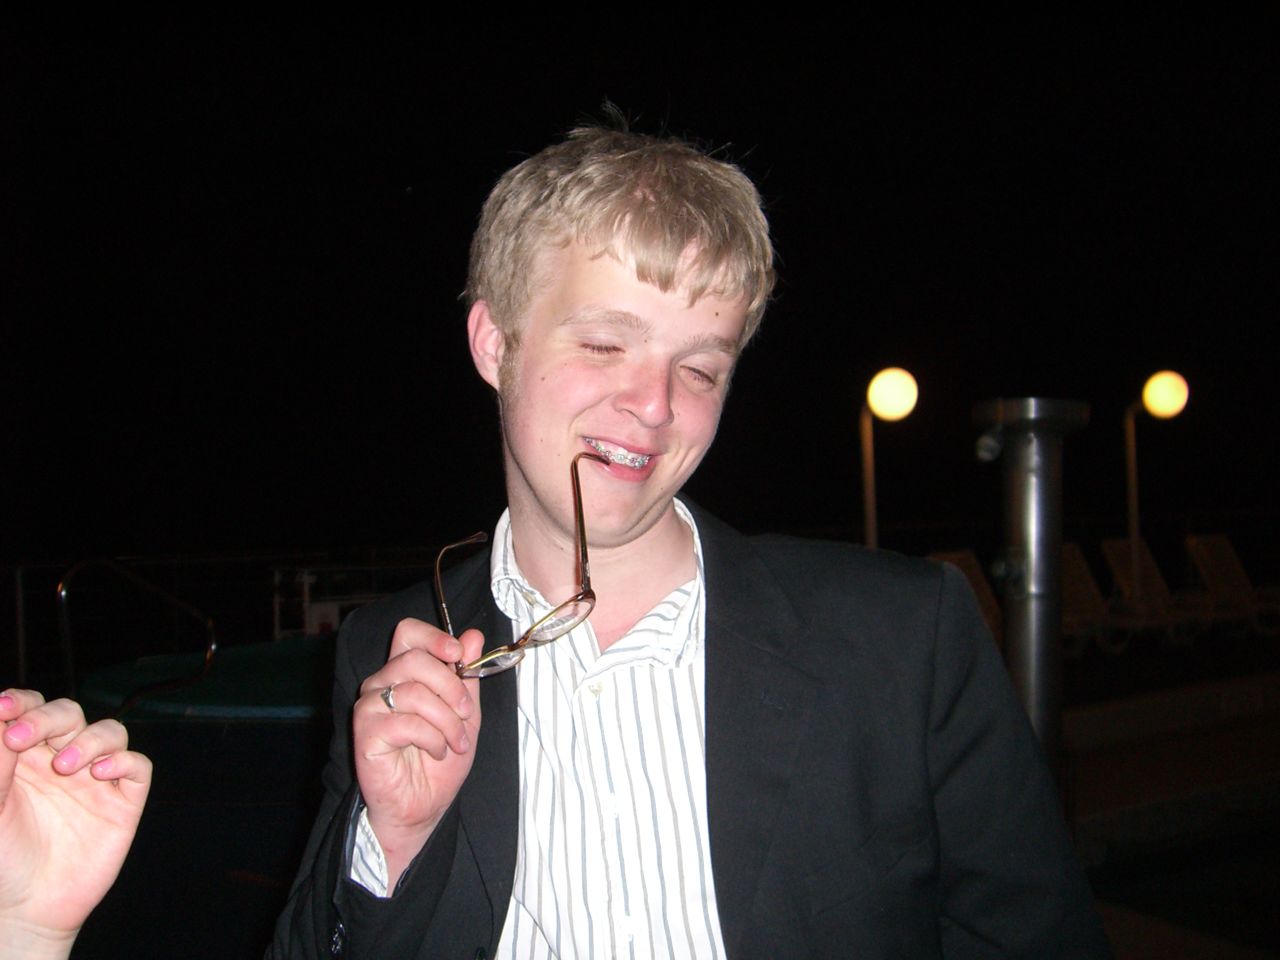 a man biting into soing while wearing a suit and tie